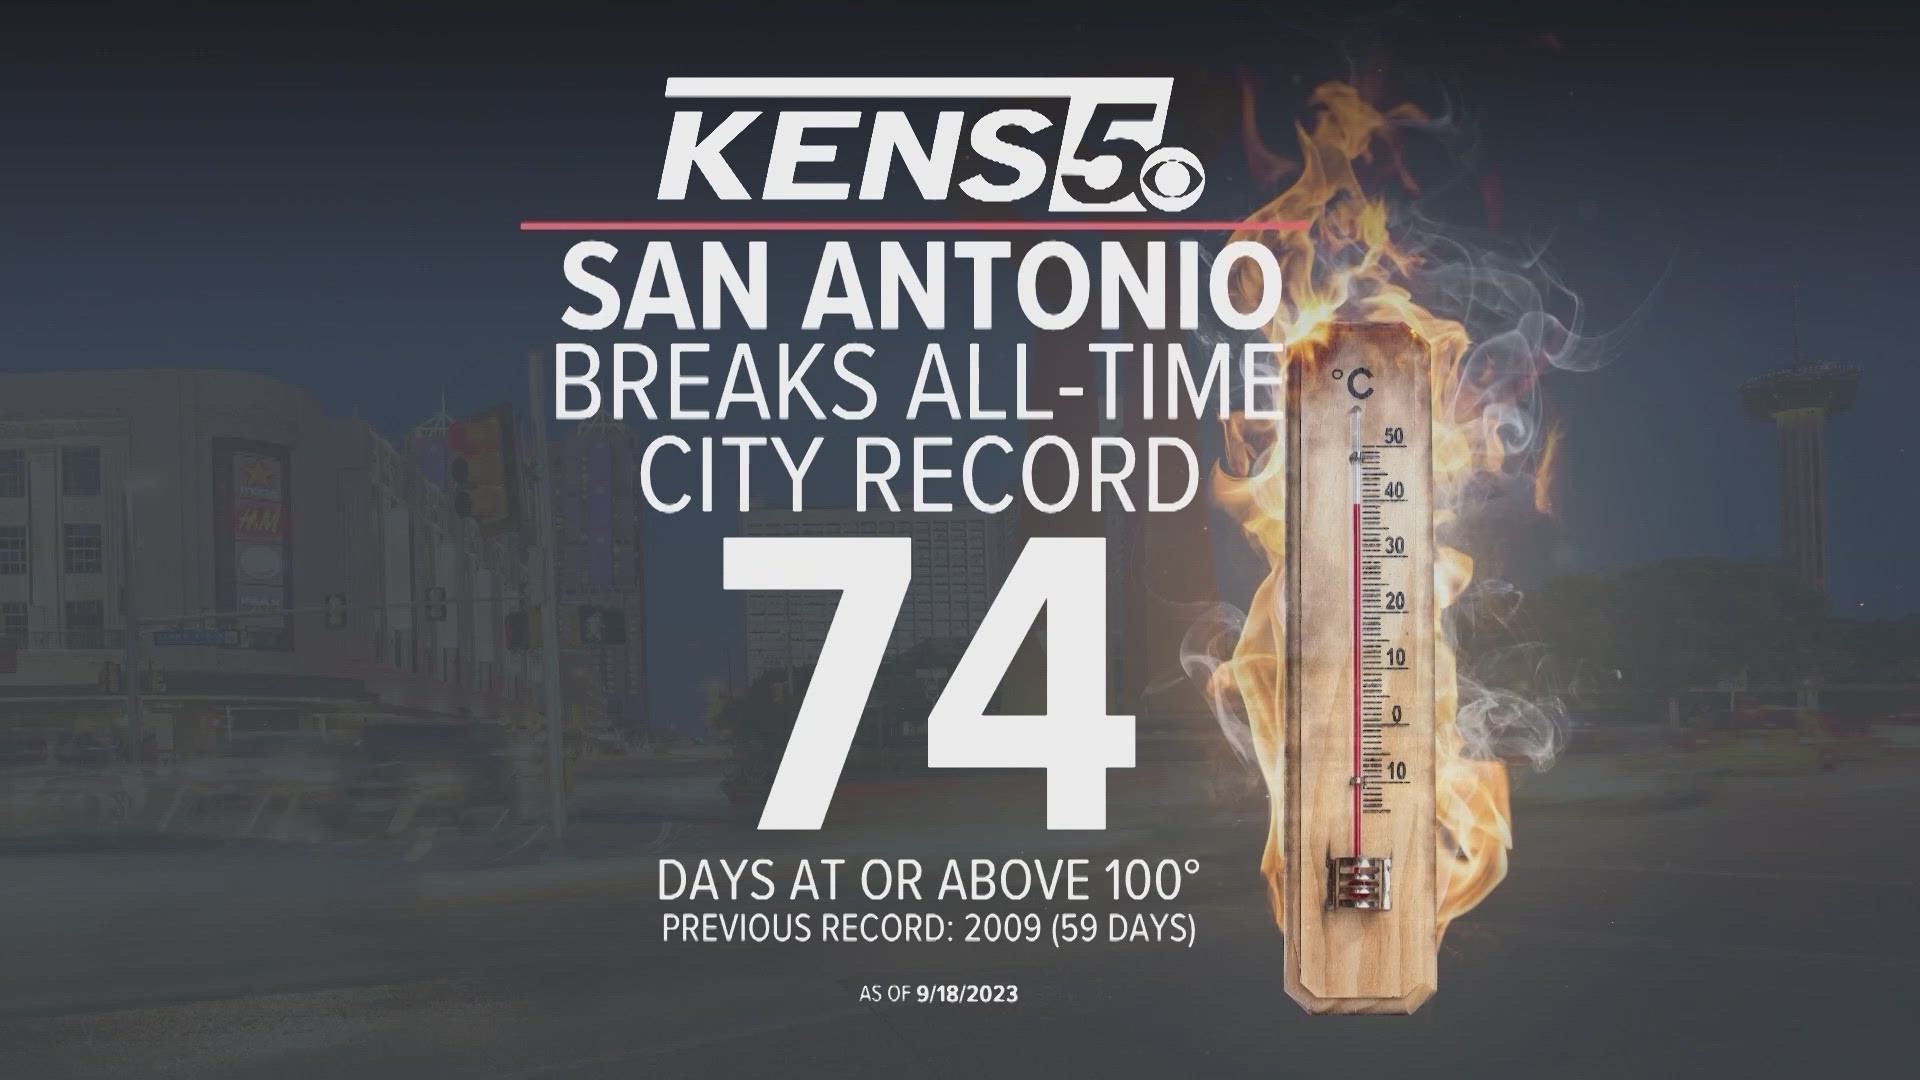 Multiple records were broken in a year that saw 74 days over 100 degrees.